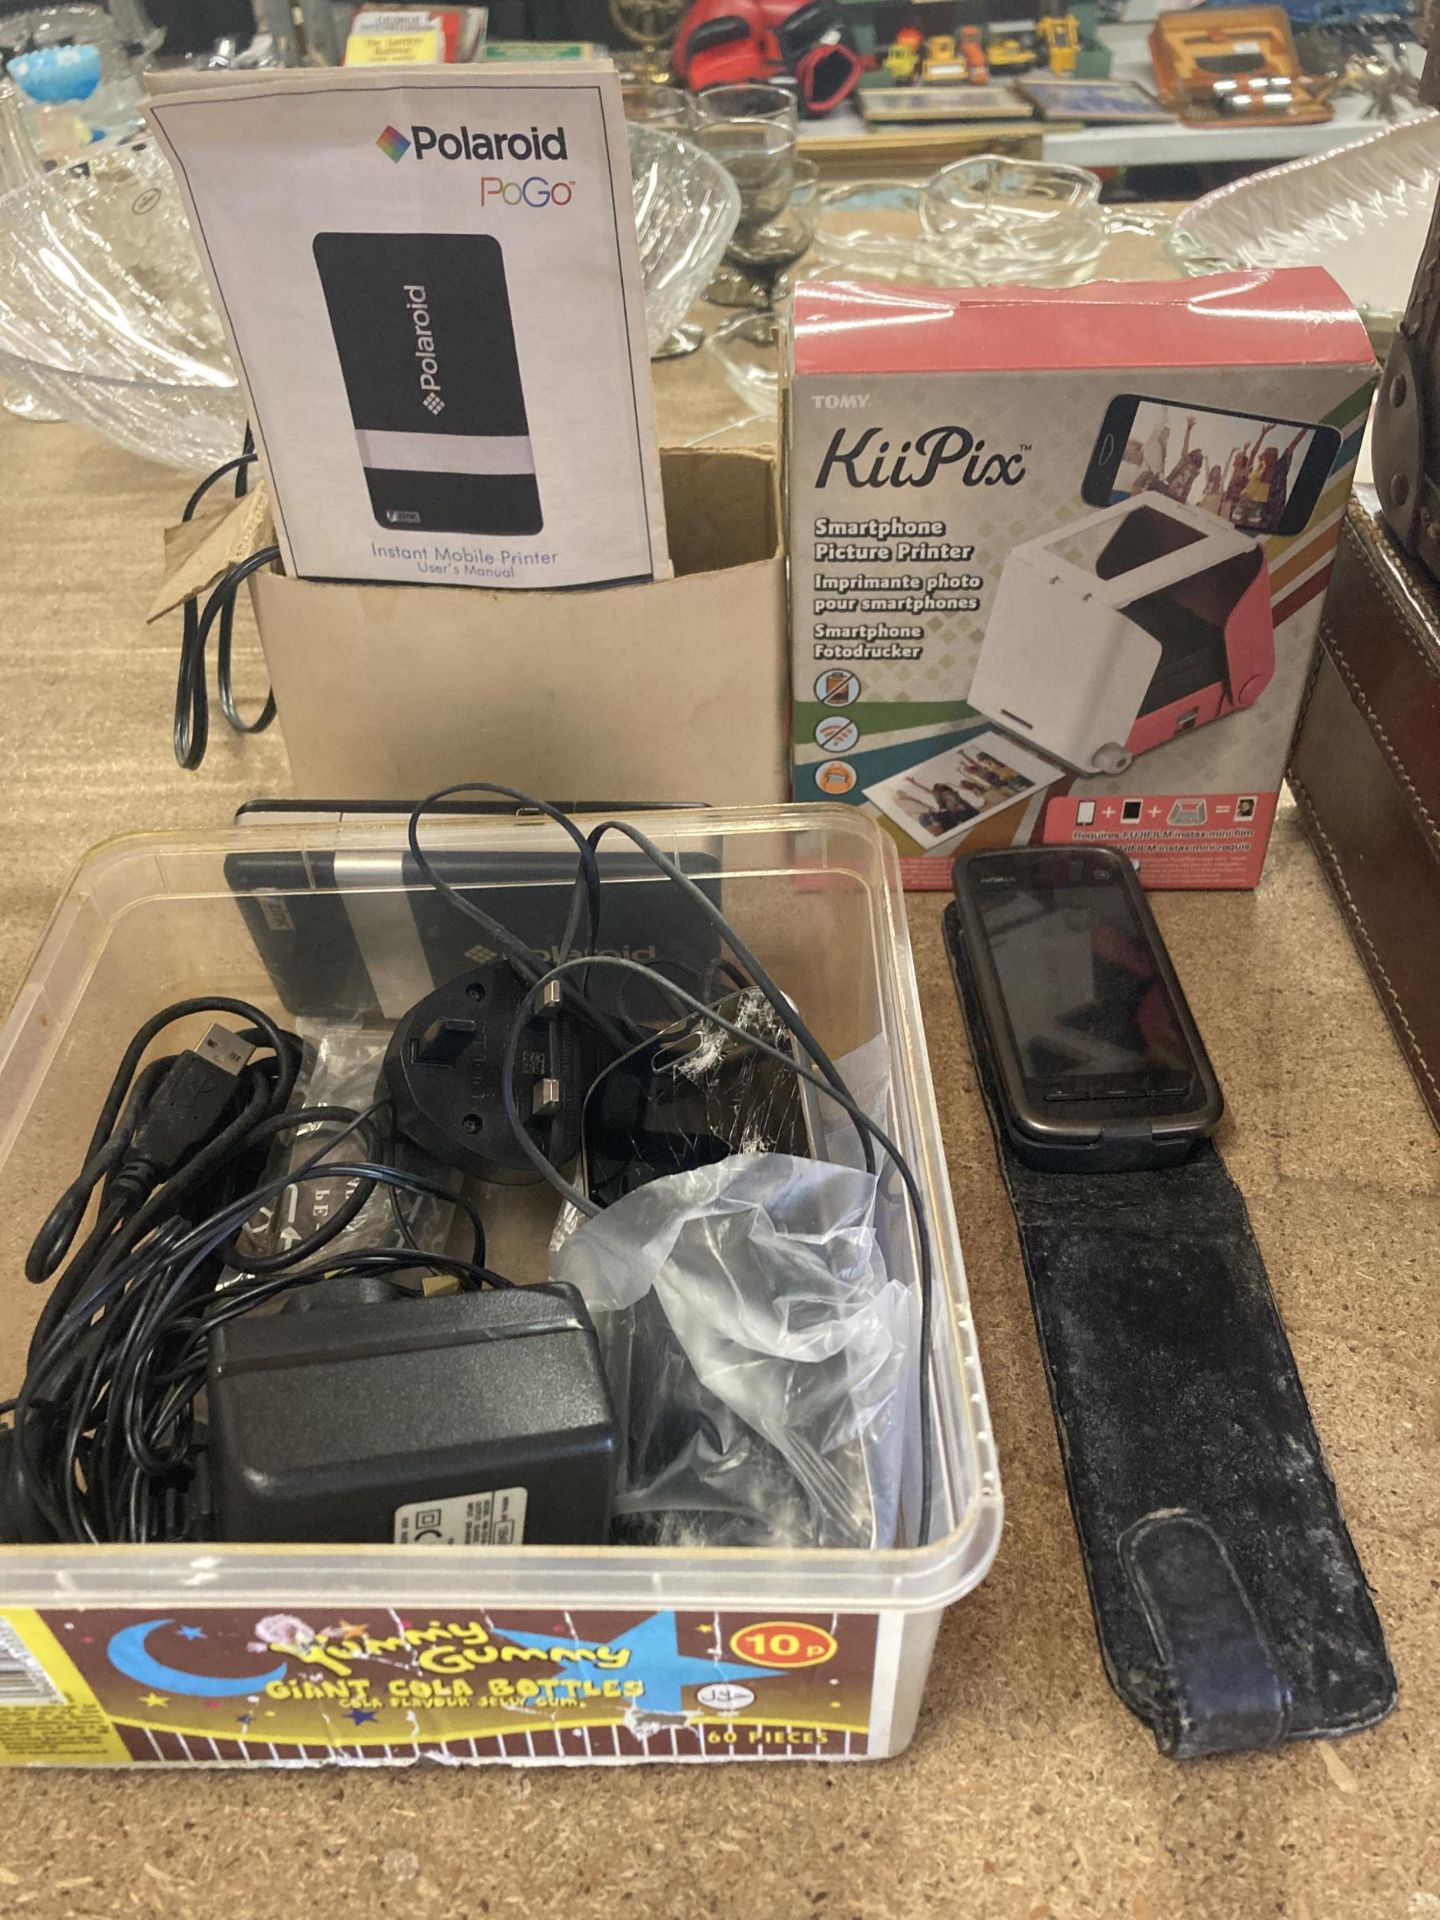 TWO VINTAGE MOBILE PHONES WITH CHARGERS, A TOMY SMARTPHONE PICTURE PRINTER AND A POLAROID POGO